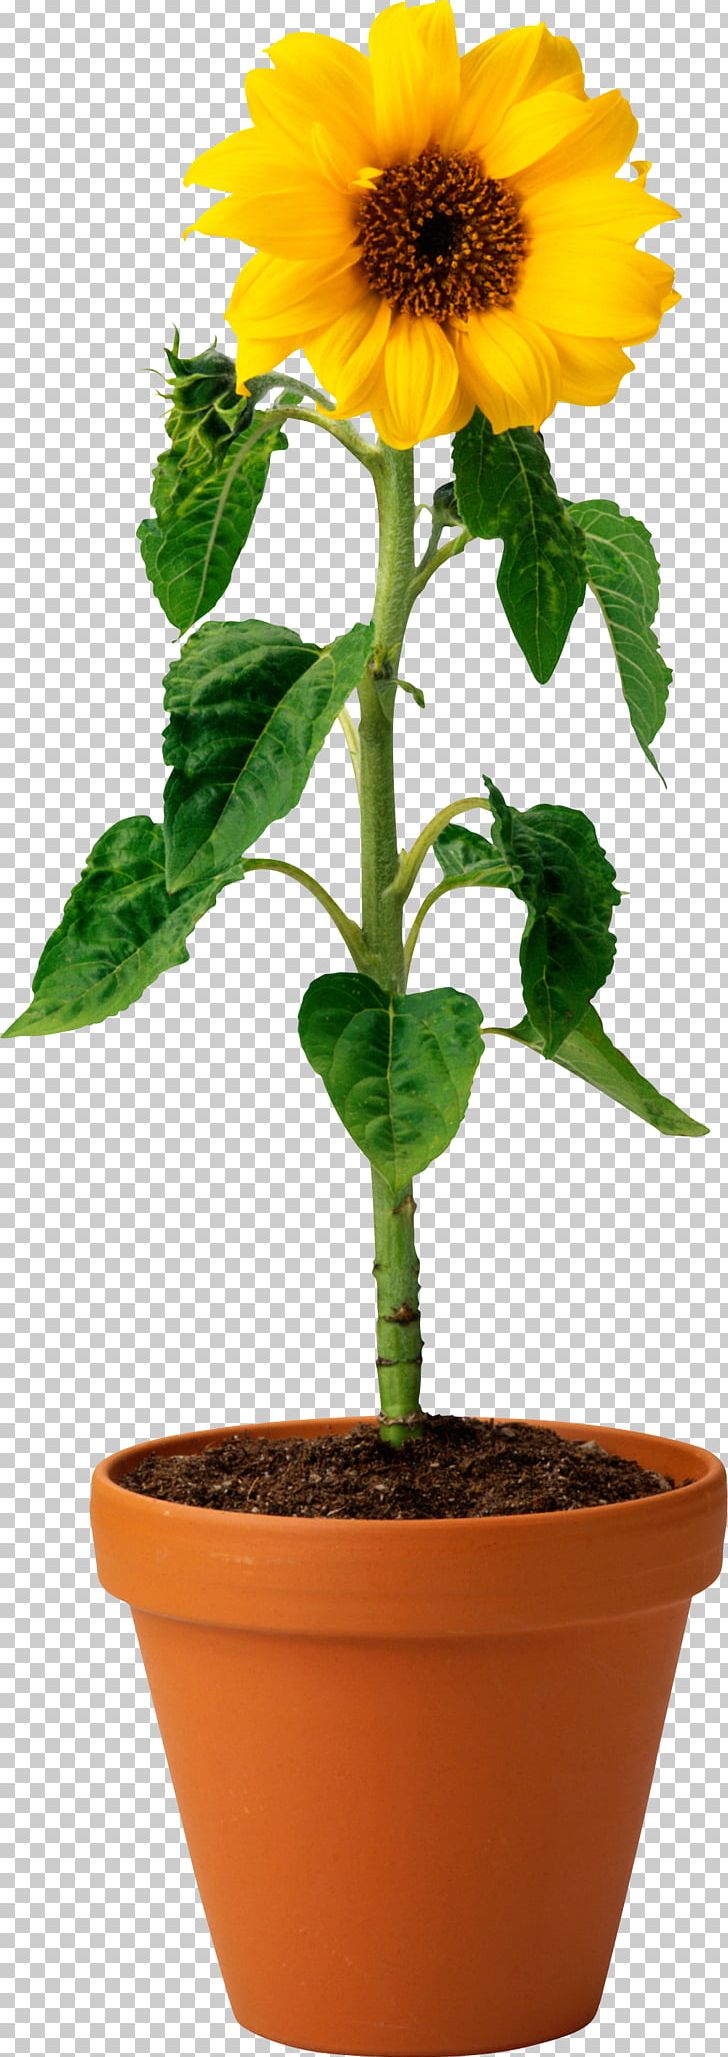 seedling clipart plant reproduction